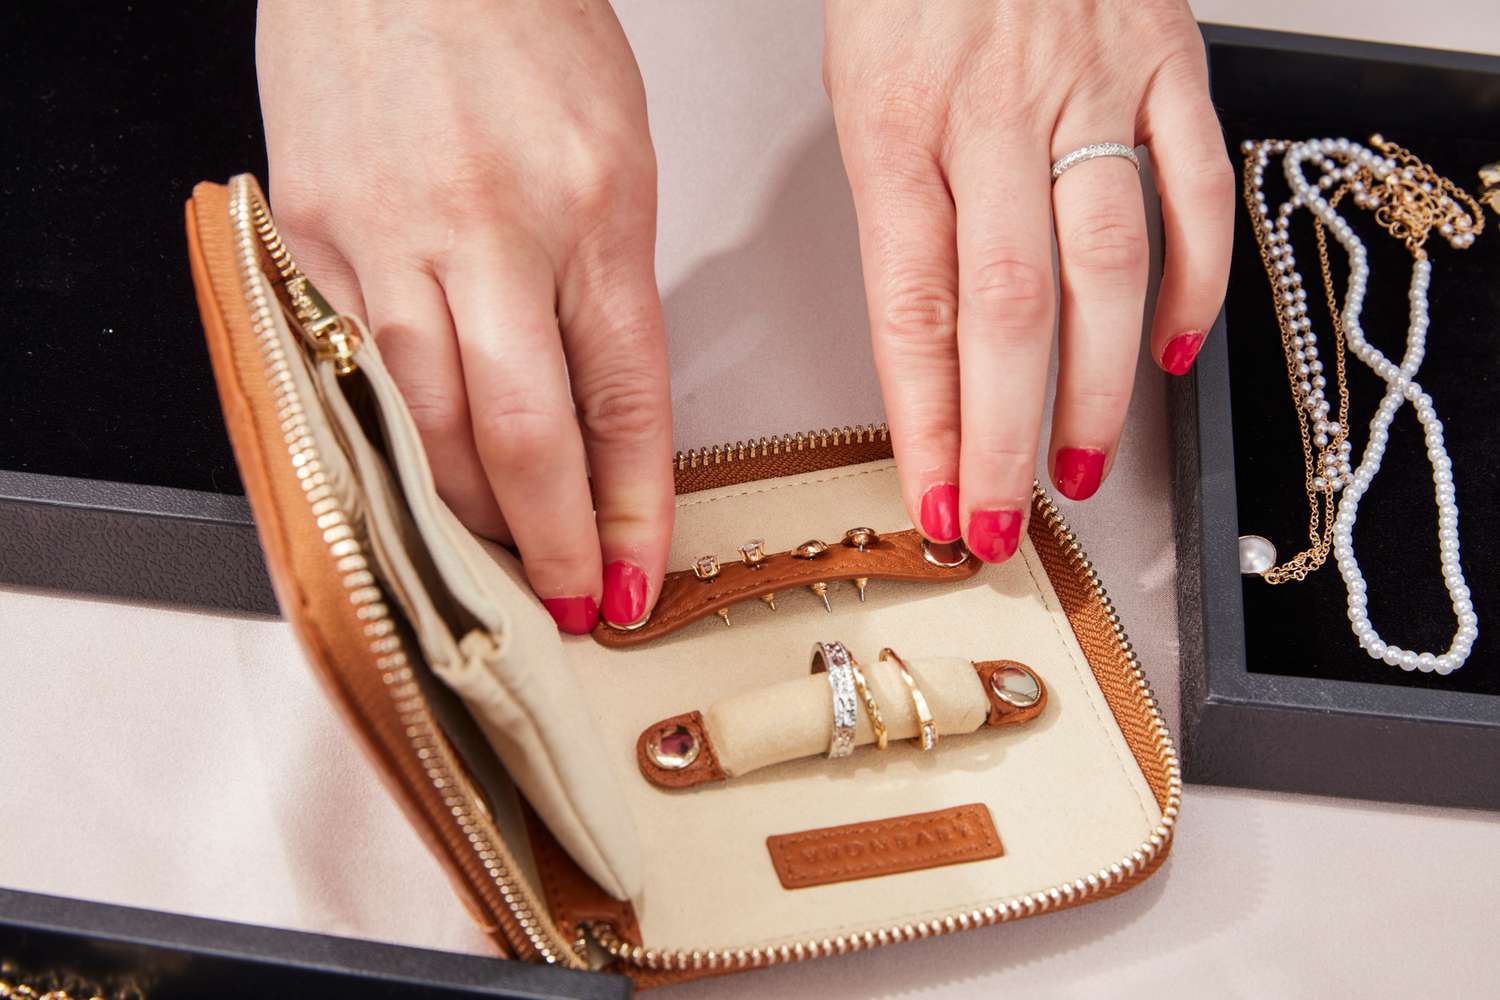 A person puts earrings into the Levenger Carrie Mini Jewelry Organizer.